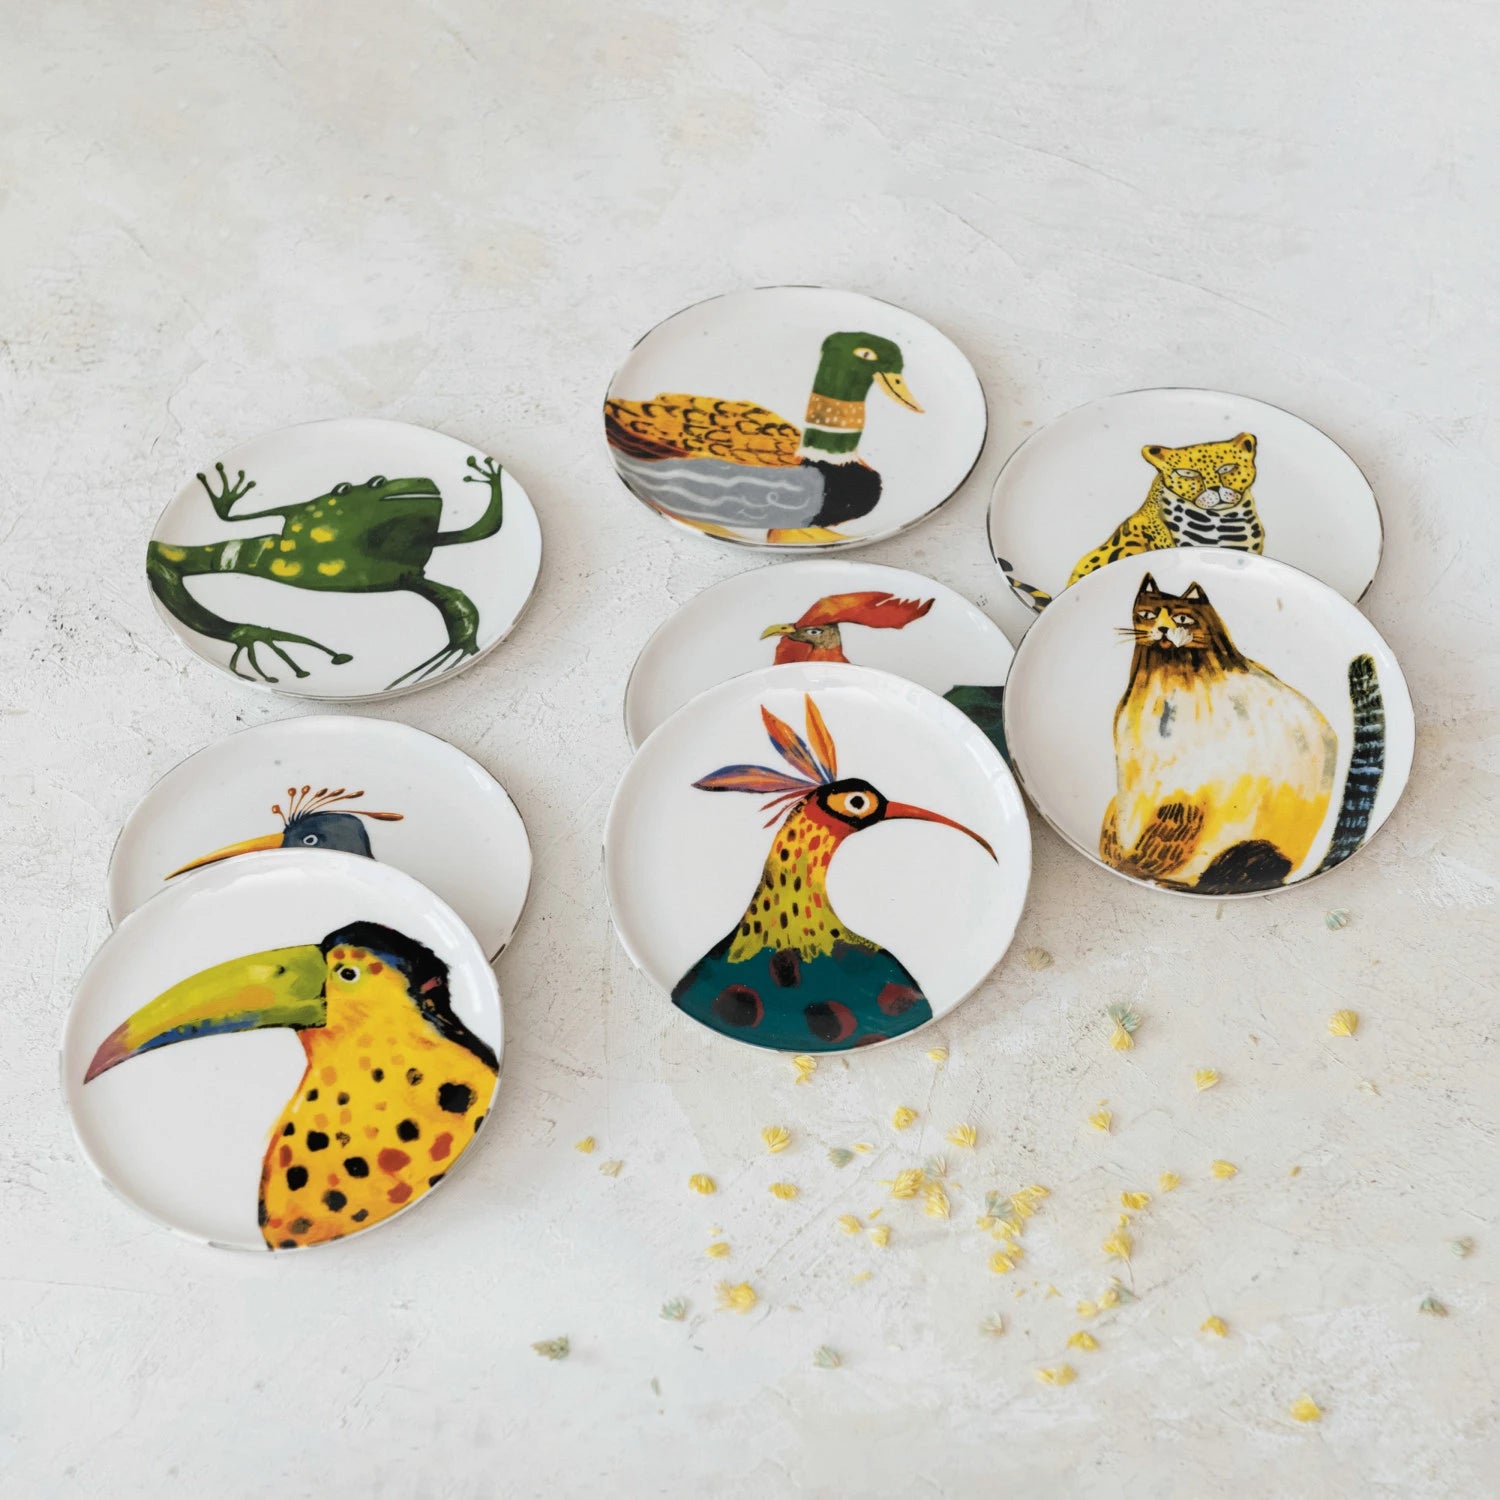 8 assorted plates with animal or bird artwork on them arranged on a plaster surface.